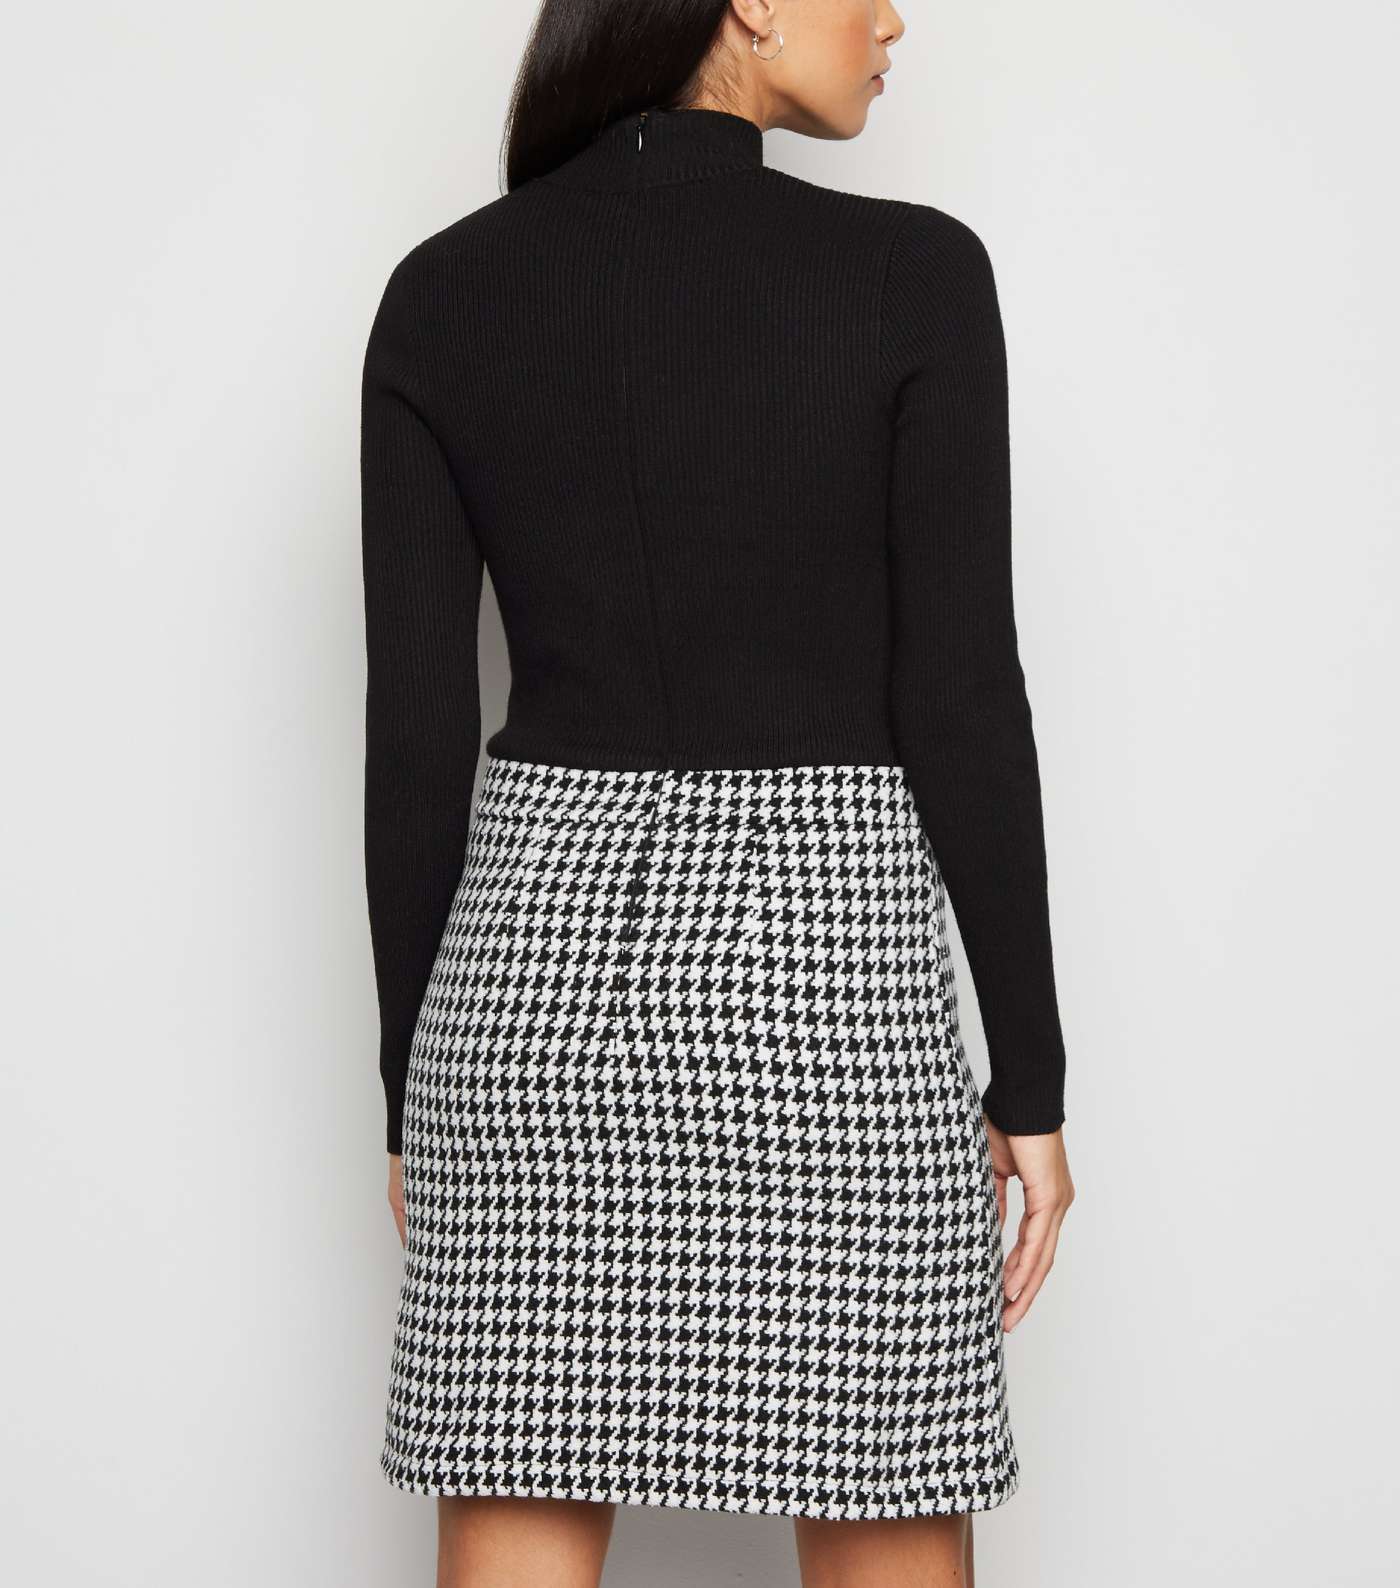 Black Dogtooth 2 in 1 Dress Image 3